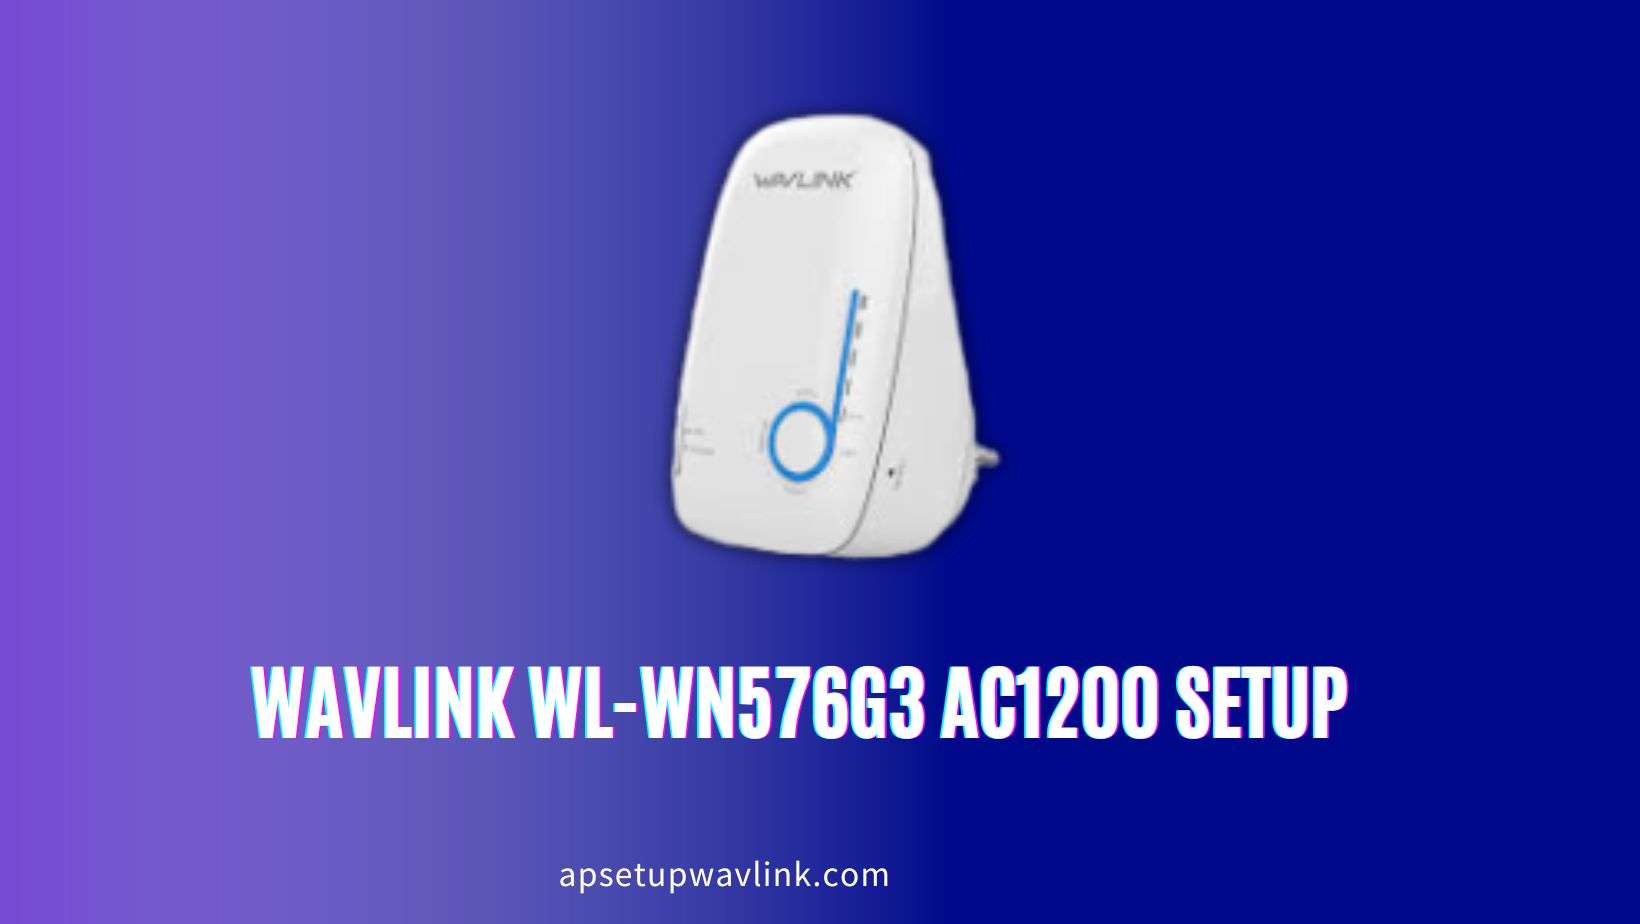 You are currently viewing Wavlink WL-WN576G3 AC1200 Setup